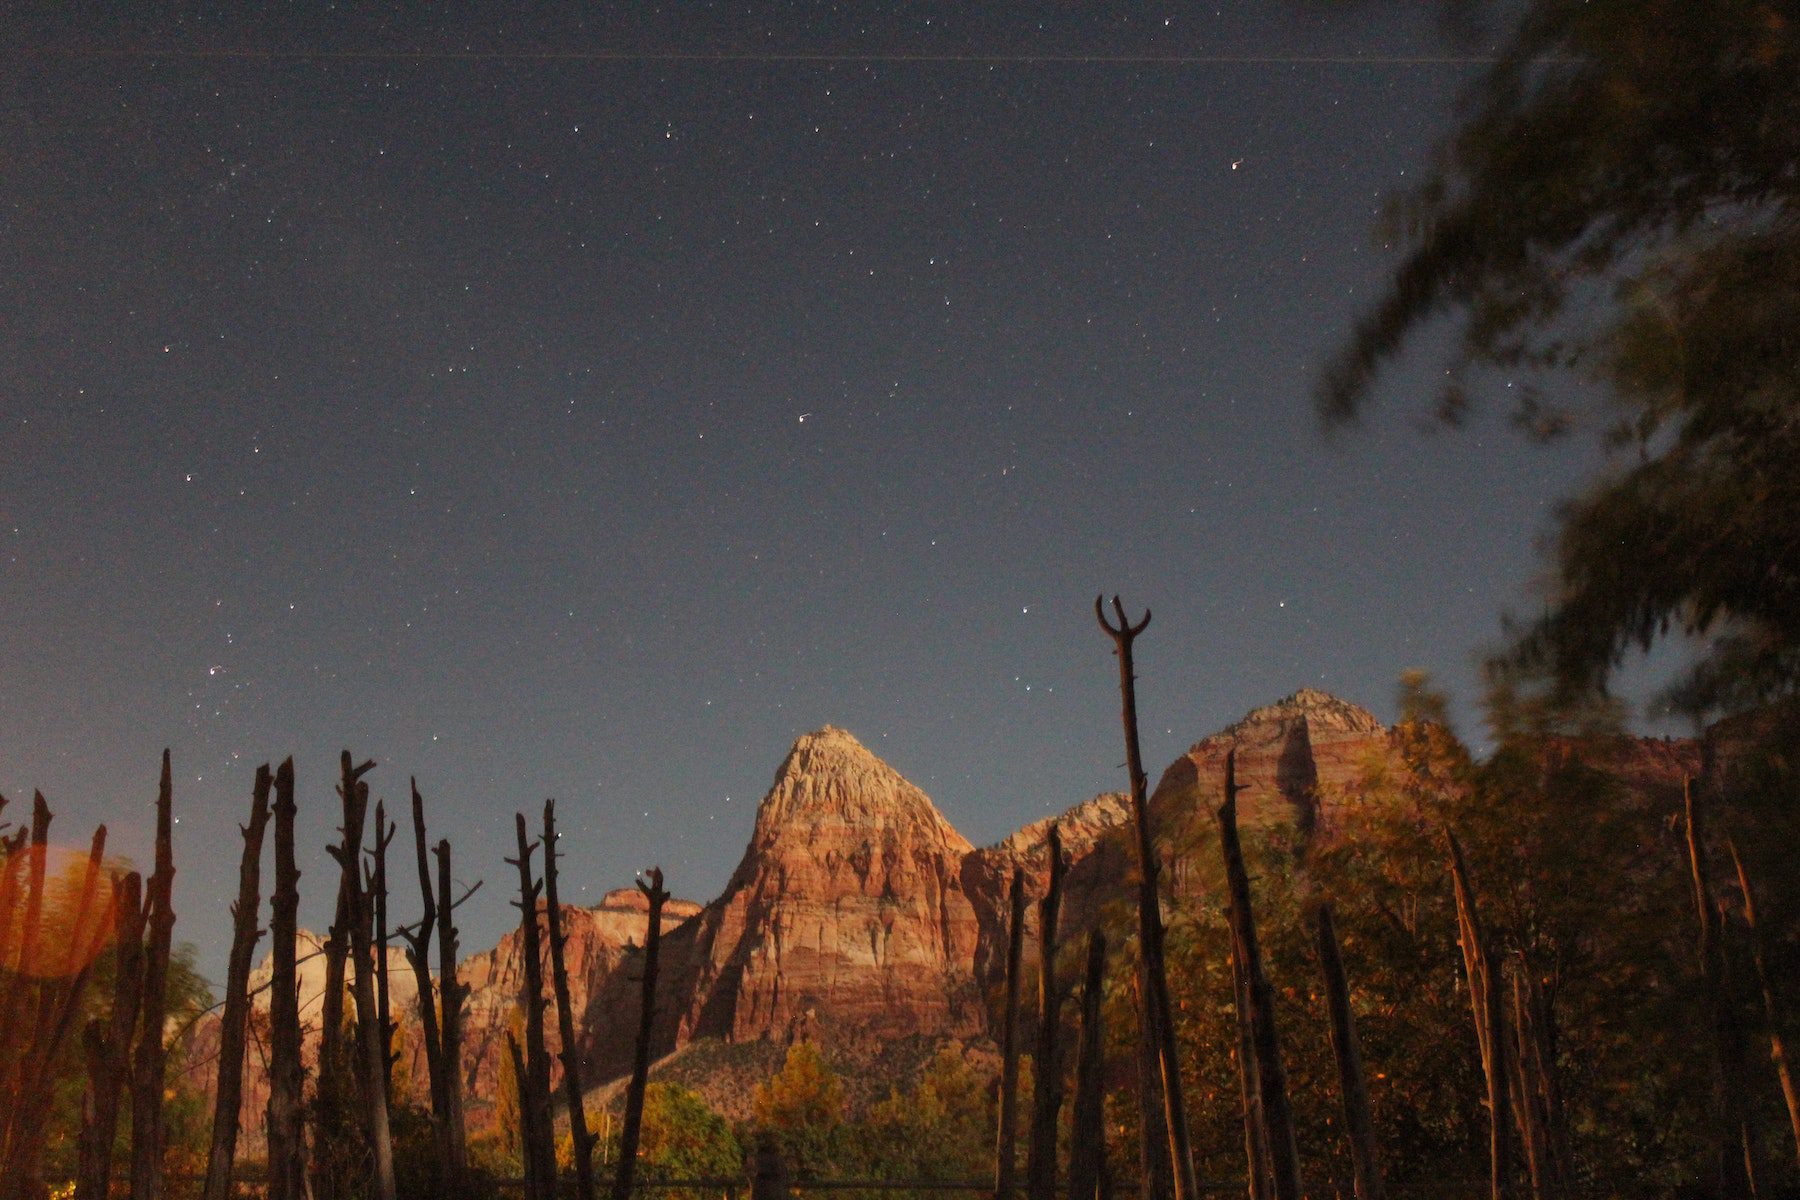 Zion National Park, United States, with star-filled night sky and views of sandstone formation and desert plants.